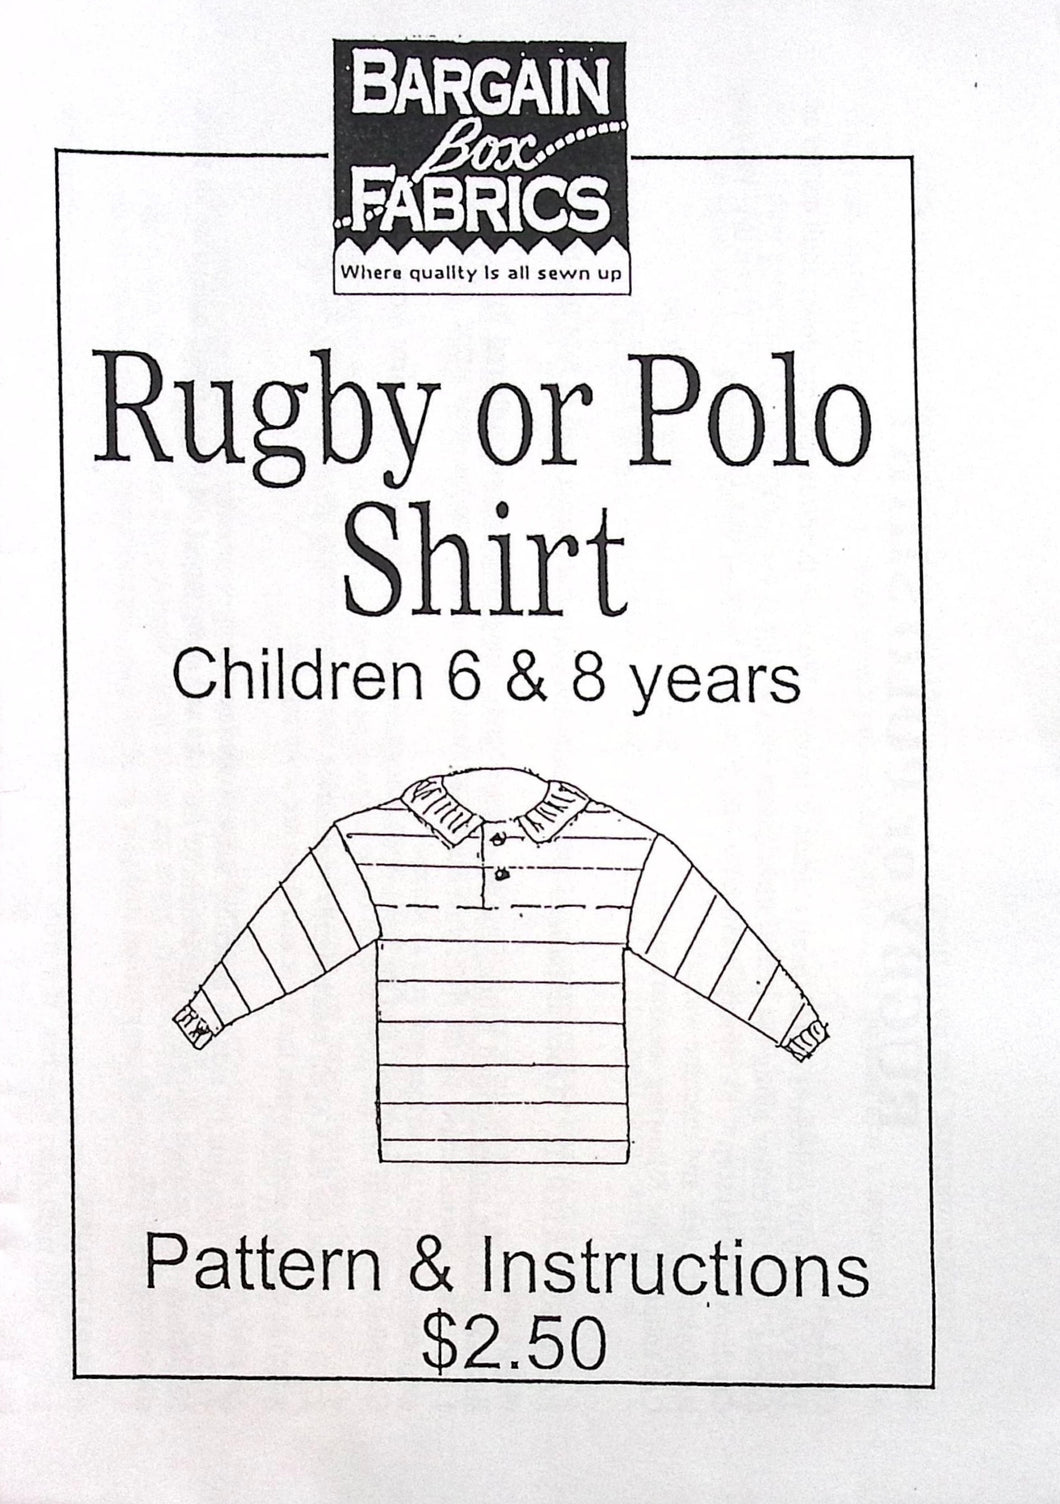 Vintage Sewing Pattern: Bargain Box Fabrics Rugby or Polo Top